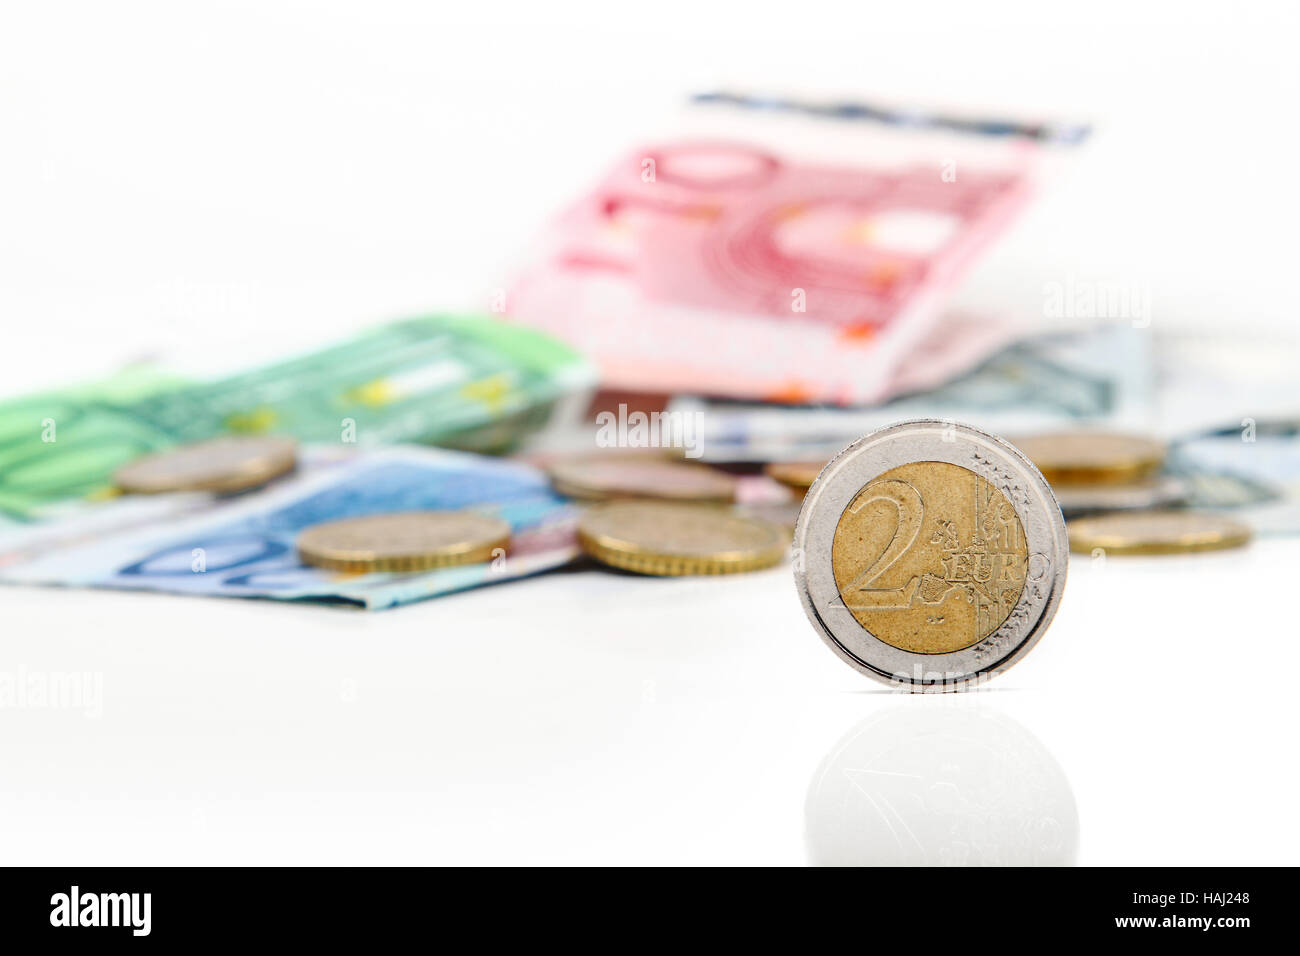 two euro coin with other euro coins and banknotes in background Stock Photo